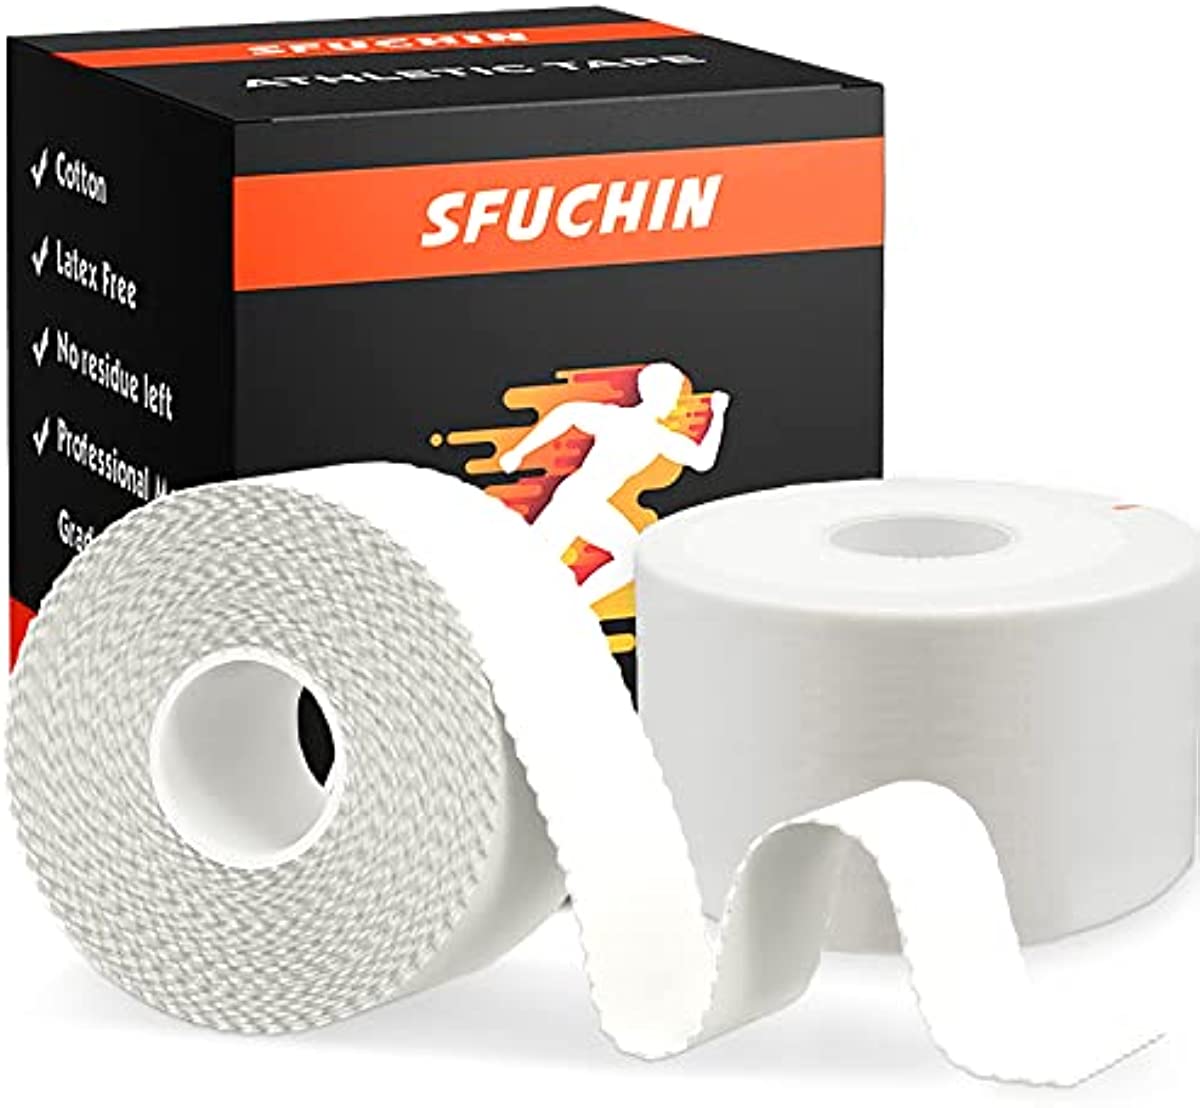 Athletic Tape - Medical Tape - Ankle Tape - Sfuchin 2 Pack 1.5\" X 15 Yard Sports Tape - Strong Easy Tear NO Sticky Residue for Wrist Tape Baseball Arms Football Climbing Boxing Lacrosse Hockey Stick